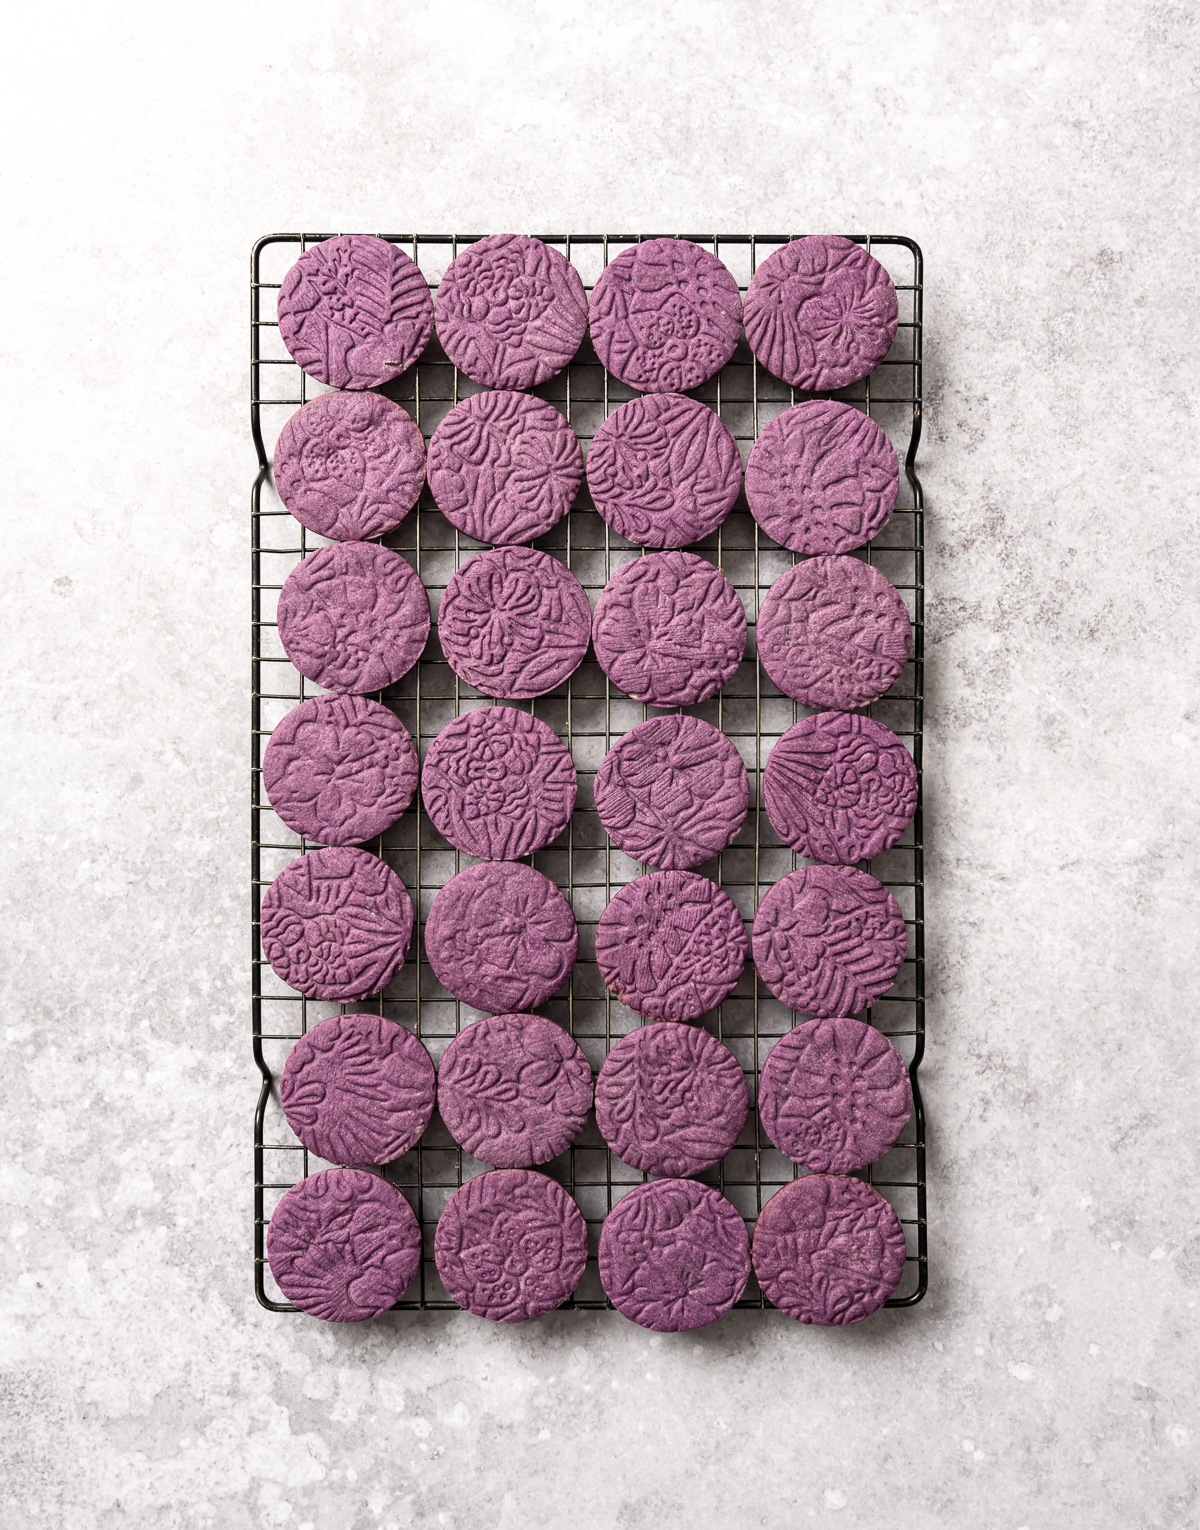 baked round embossed purple cookies on wire cooling rack
